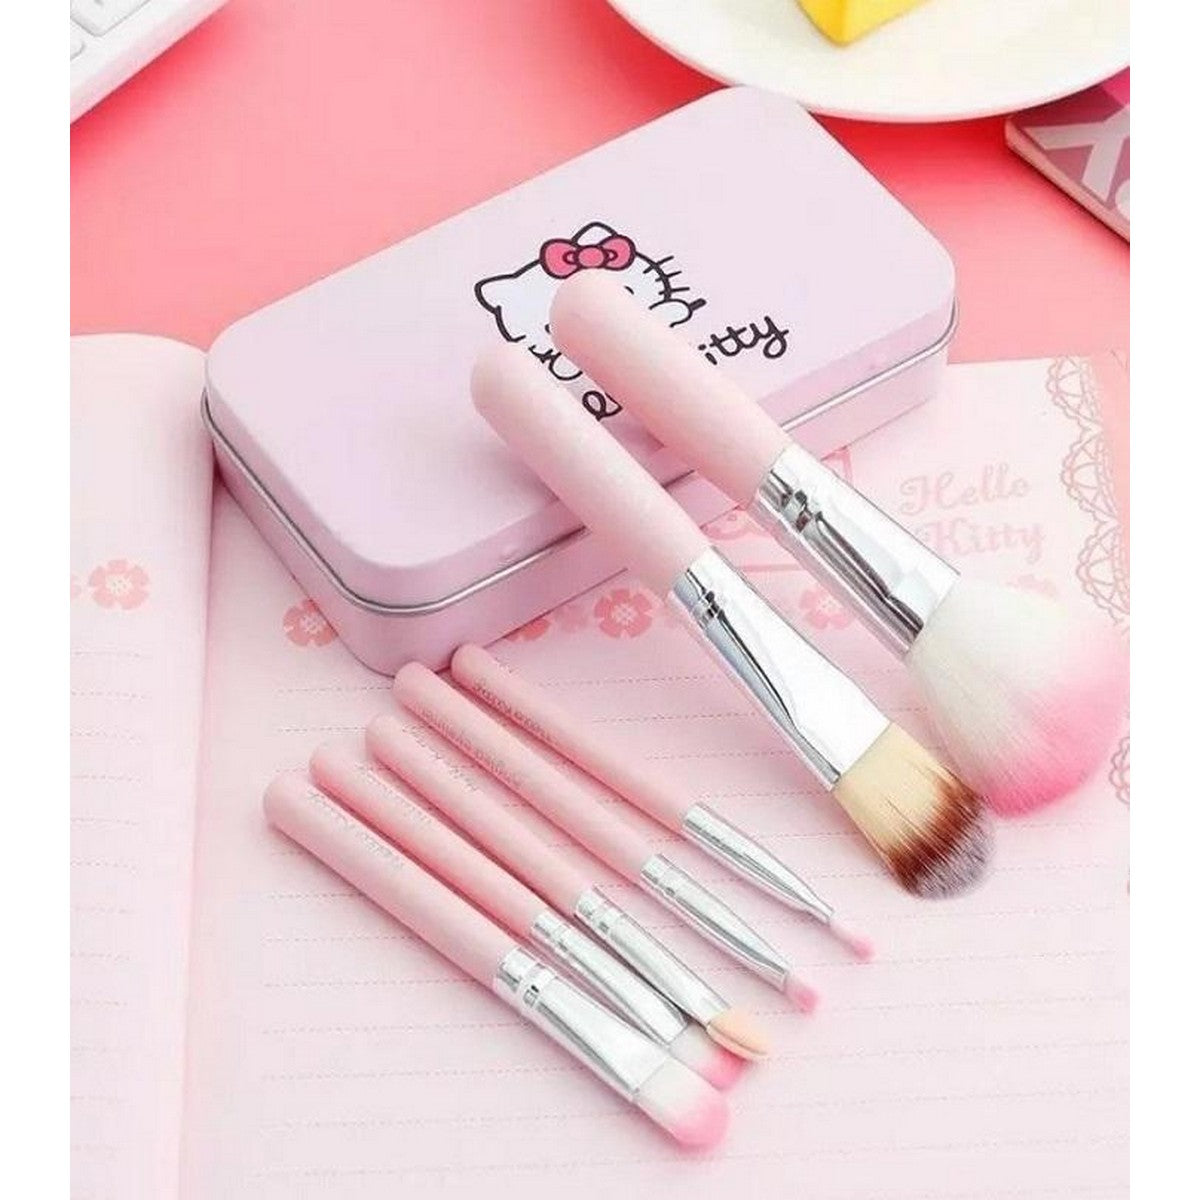 (Pack of 2) Hello Kitty Complete Makeup Mini Brush Kit with A Storage Box – Set of 7 Pieces - REVEL.PK